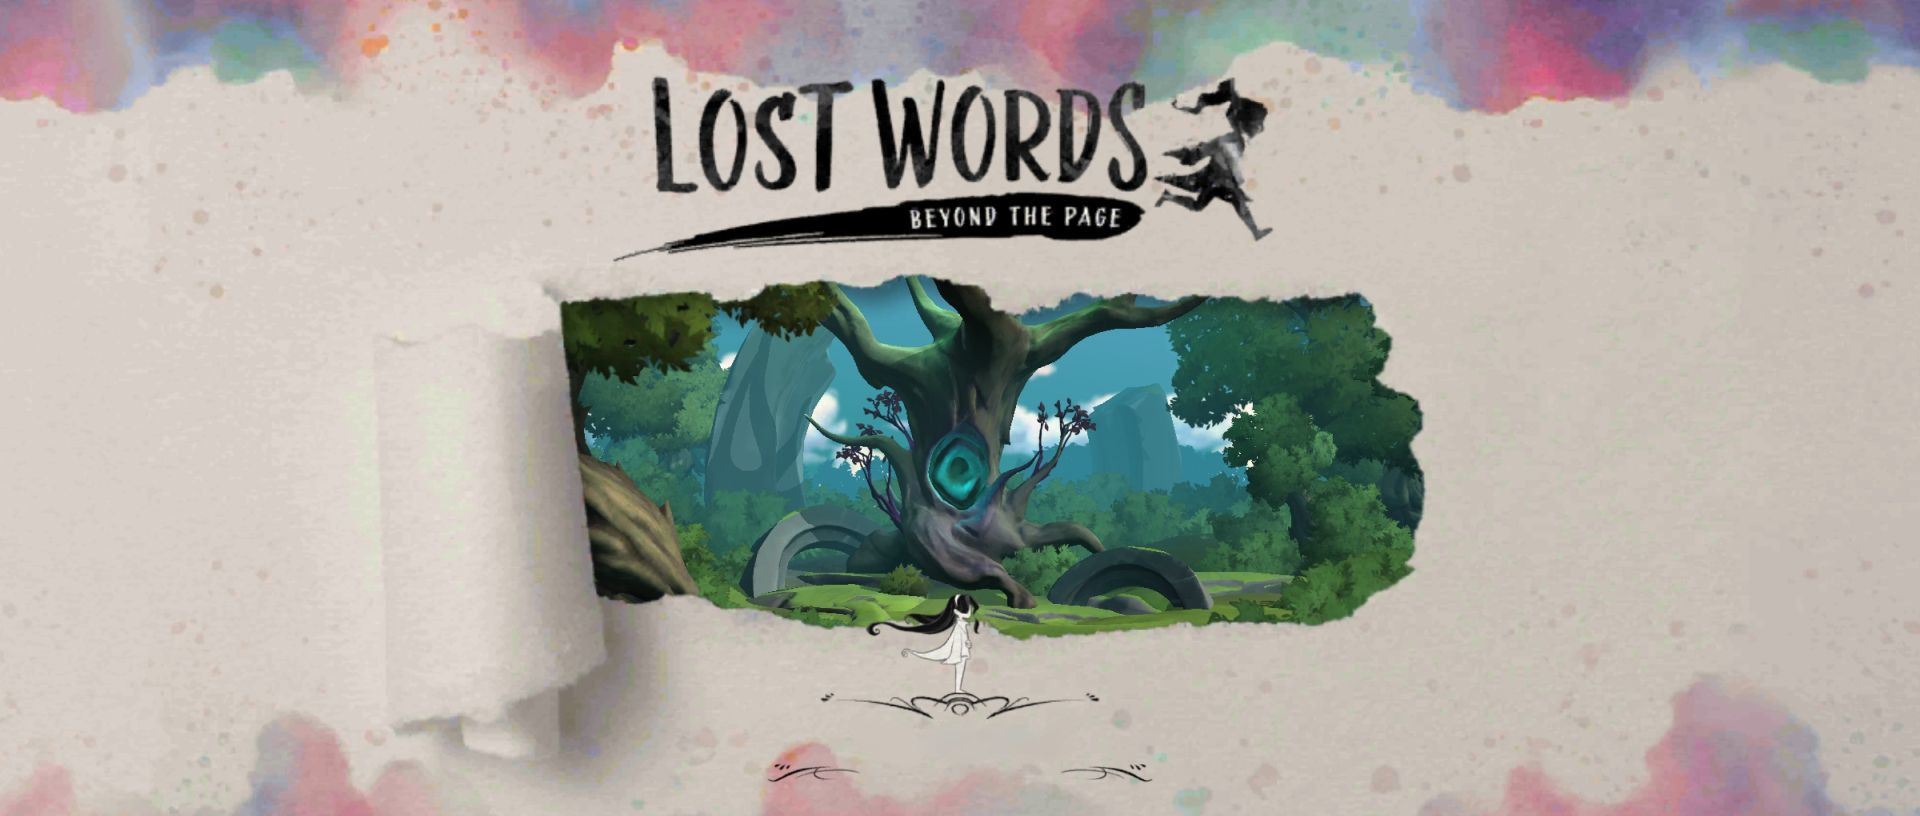 Lost Words Beyond the Page Walkthrough